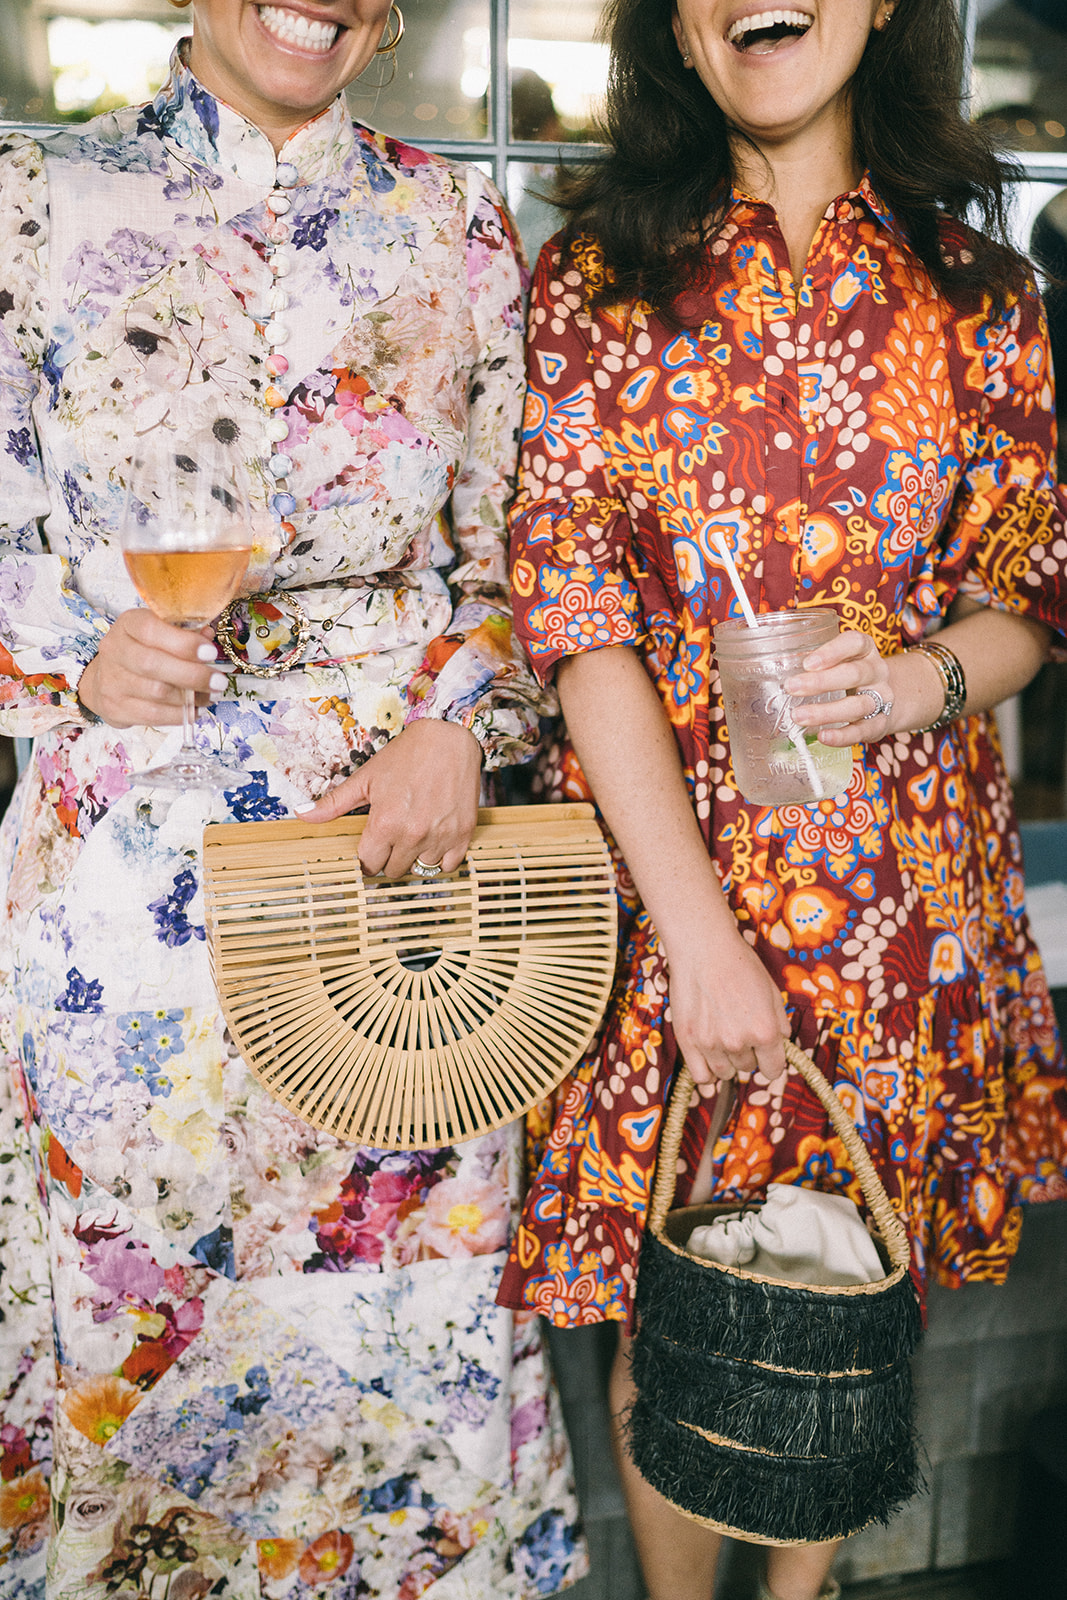 Women in colorful, flowery dresses holding drinks laughing at the camera